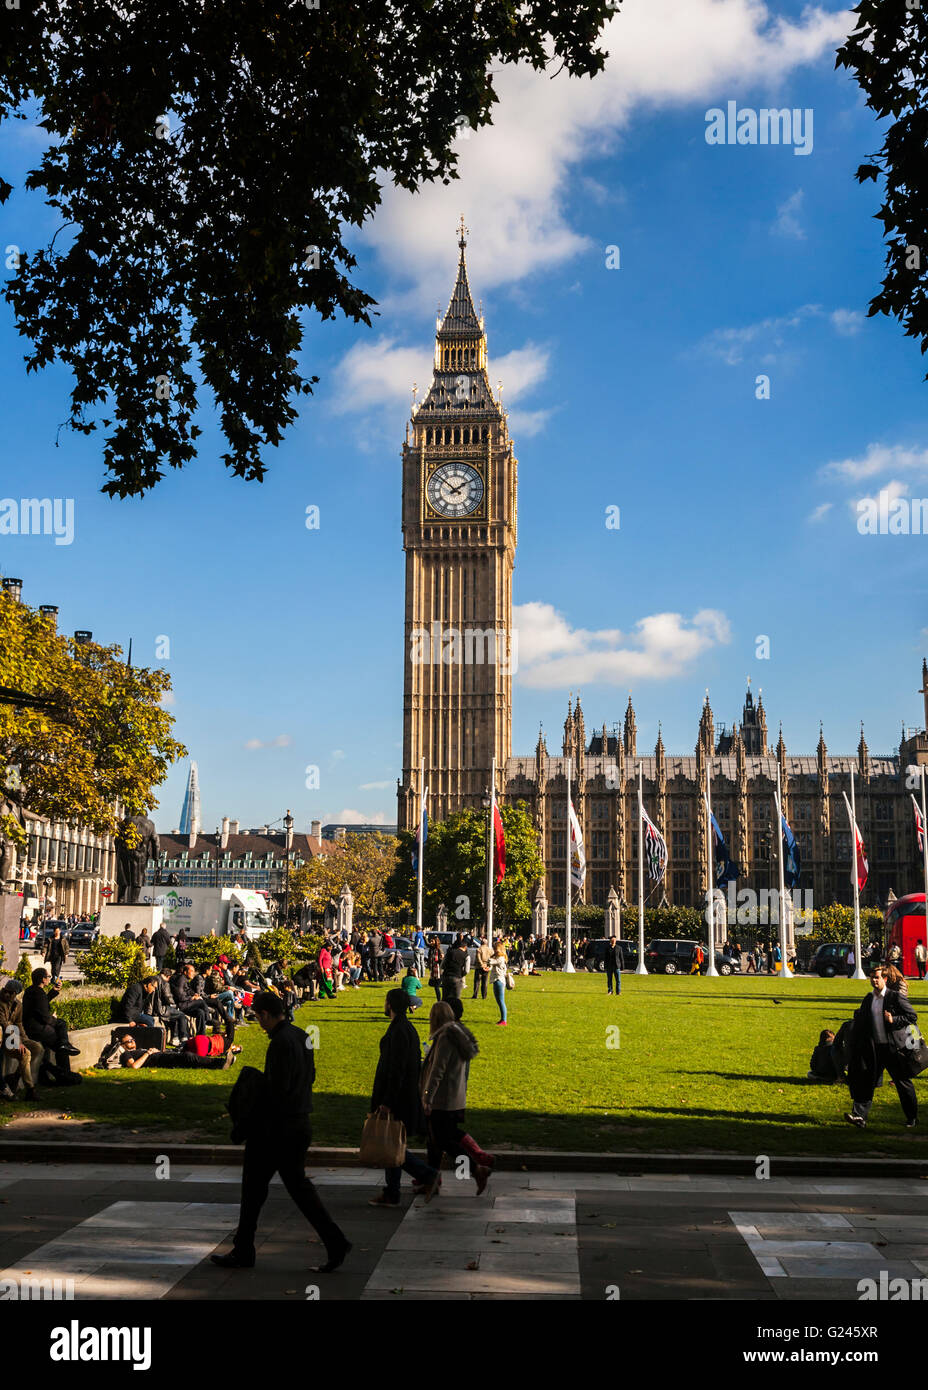 Elizabeth Tower (Big Ben) and Parliament Square, London, England. Stock Photo